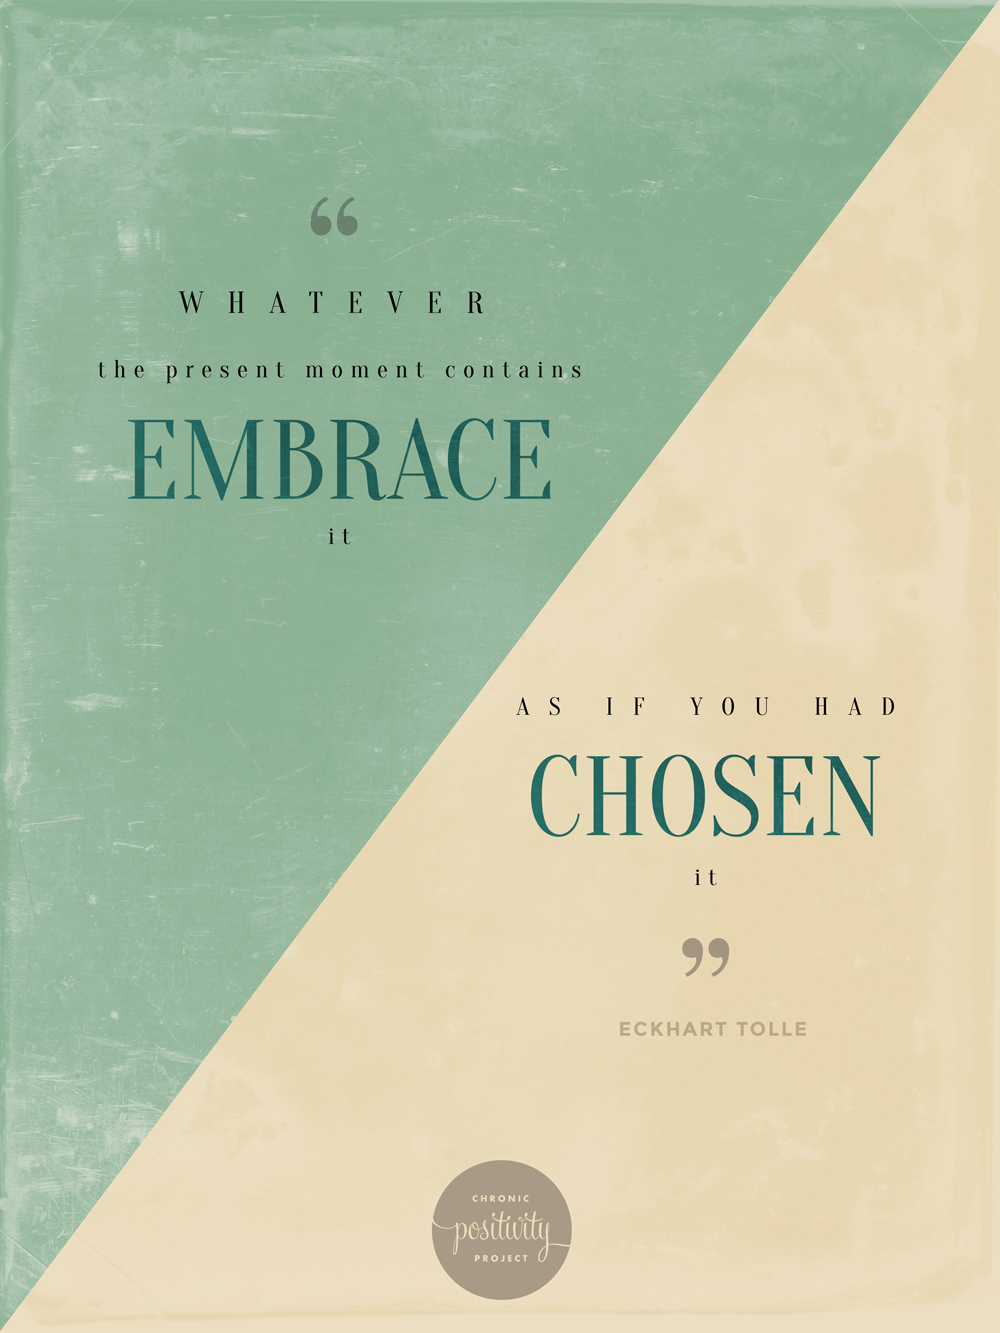 #40: Whatever the present moment contains, embrace it, as if you had chosen it. - Ecjhart Tolle | Chronic Positivity Project | Inspiration Design by Mary Fran Wiley